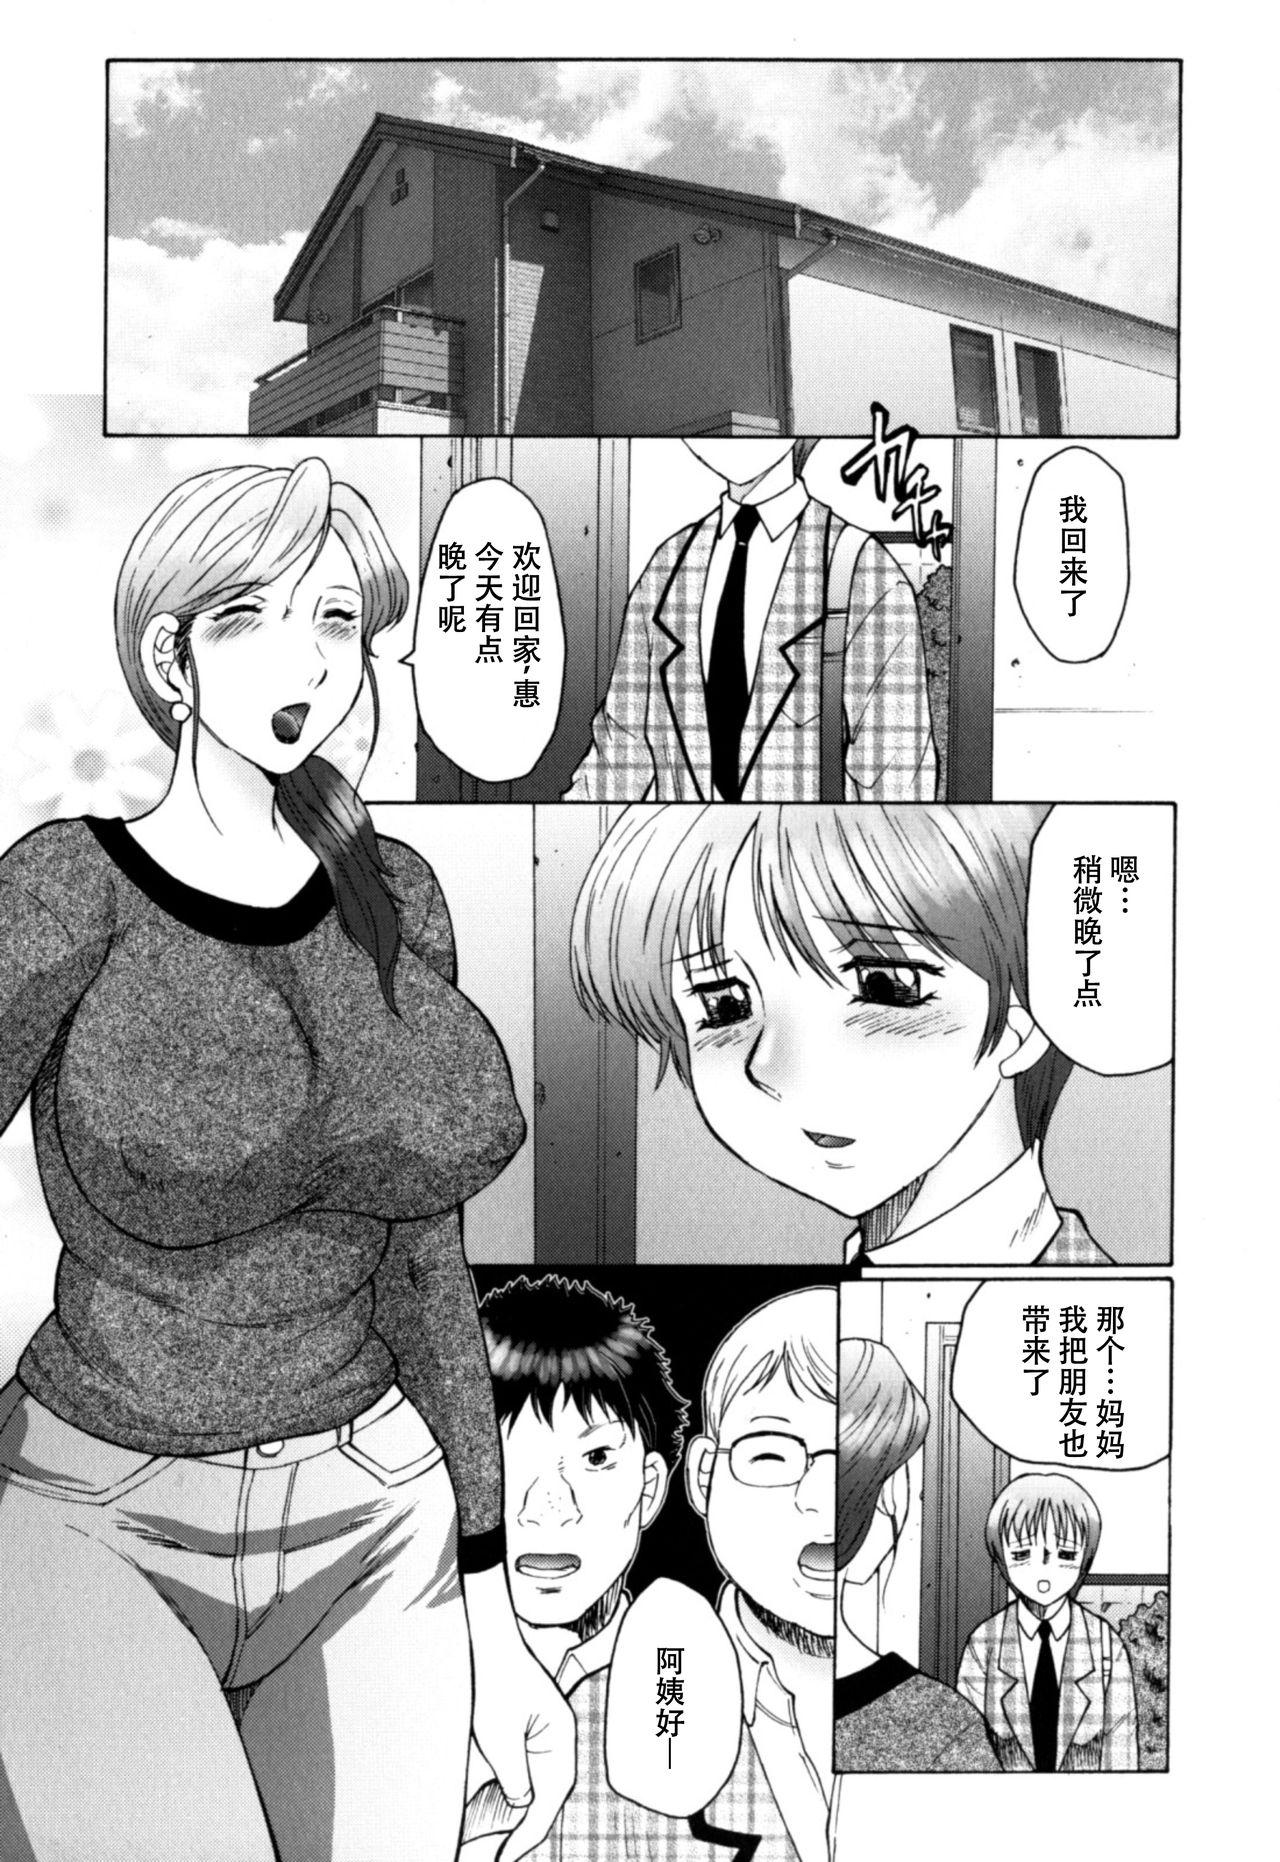 Mmd [Fuusen Club] Haha Mamire Ch. 1 [Chinese]【不可视汉化】 Pure18 - Page 4